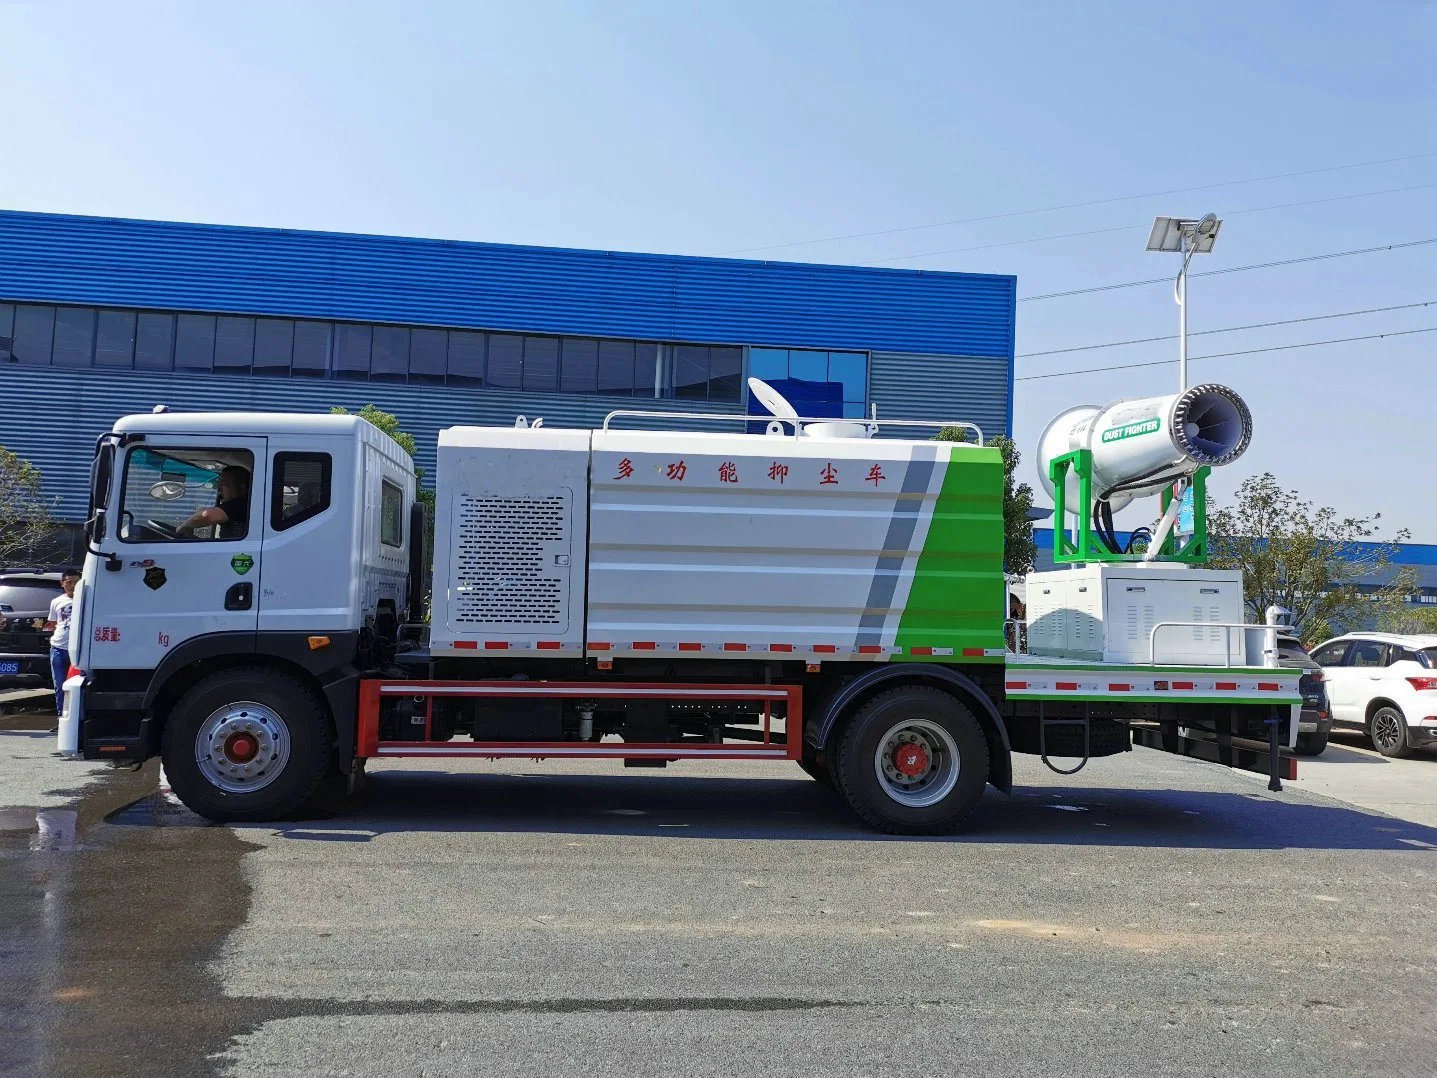 Dongfeng Small 5000liters Dust Suppression Sprayer 20m 30m 40m 50m Disinfection Truck with Remote Air-Feed Sprayer for Virus